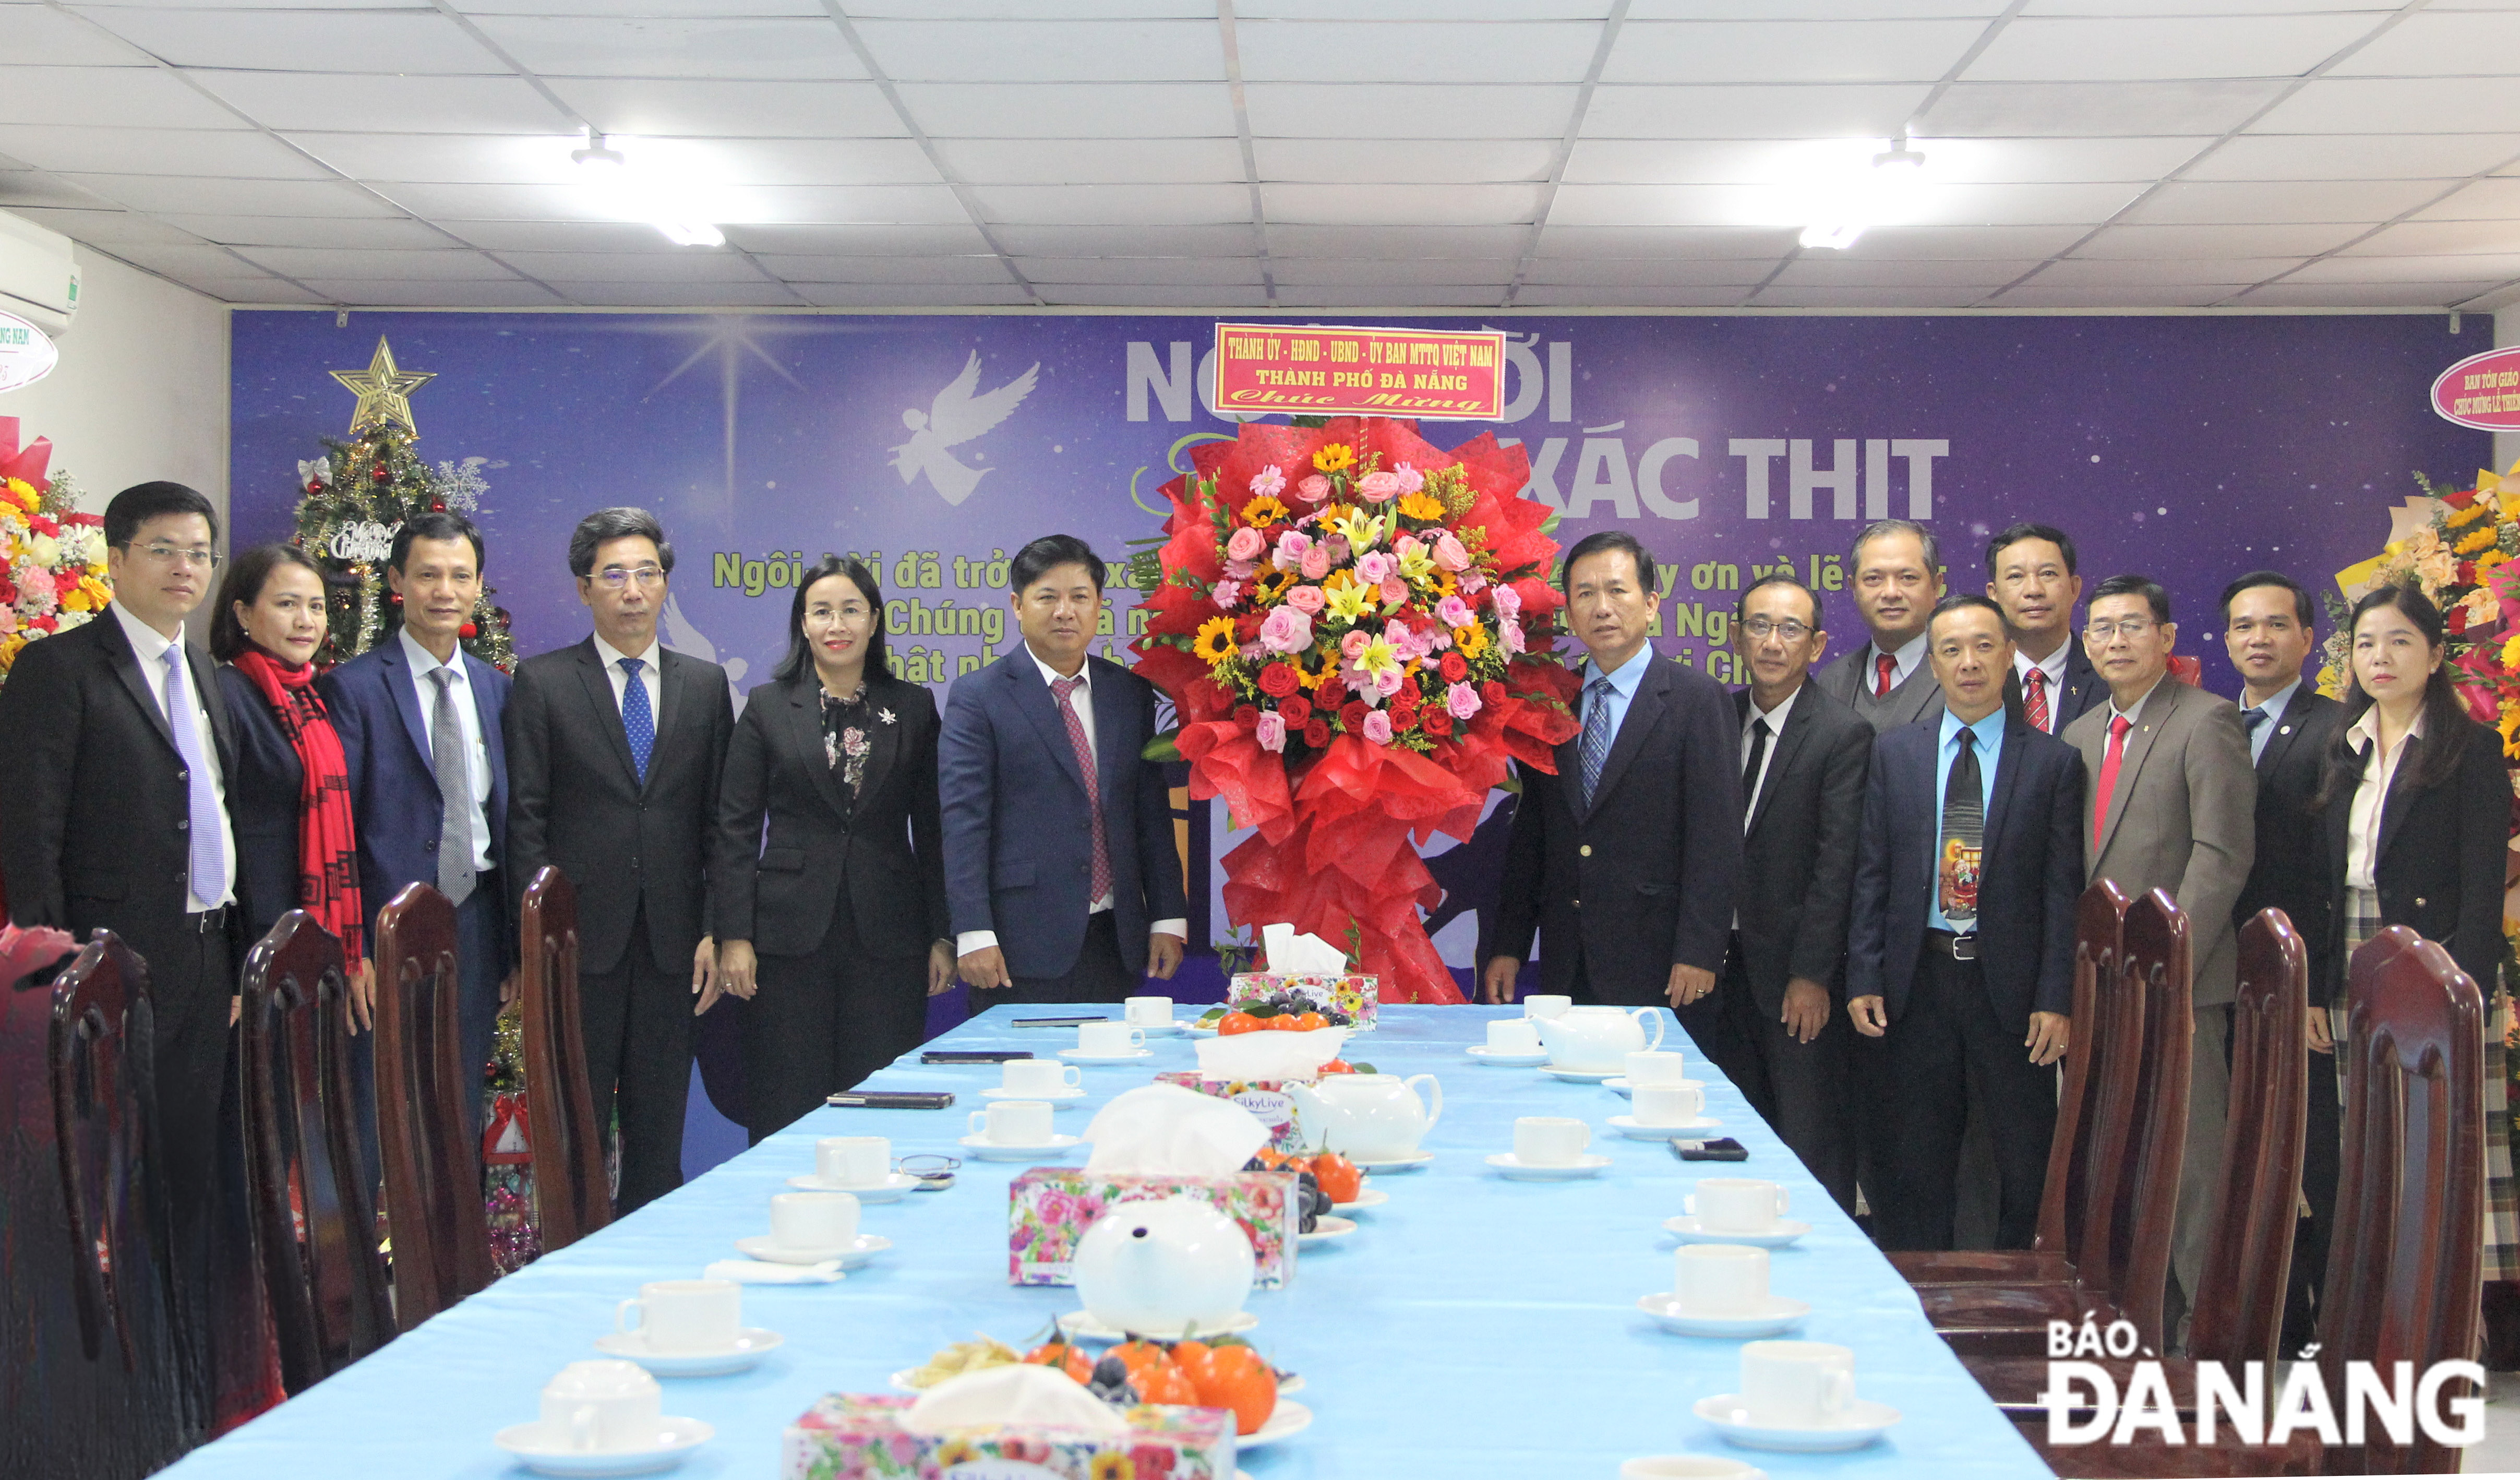 A group of Da Nang leaders, led by municipal Party Committee Deputy Secretary cum People’s Council Chairman Luong Nguyen Minh Triet (6th left), and representatives from the city-based Viet Nam Christian Mission 